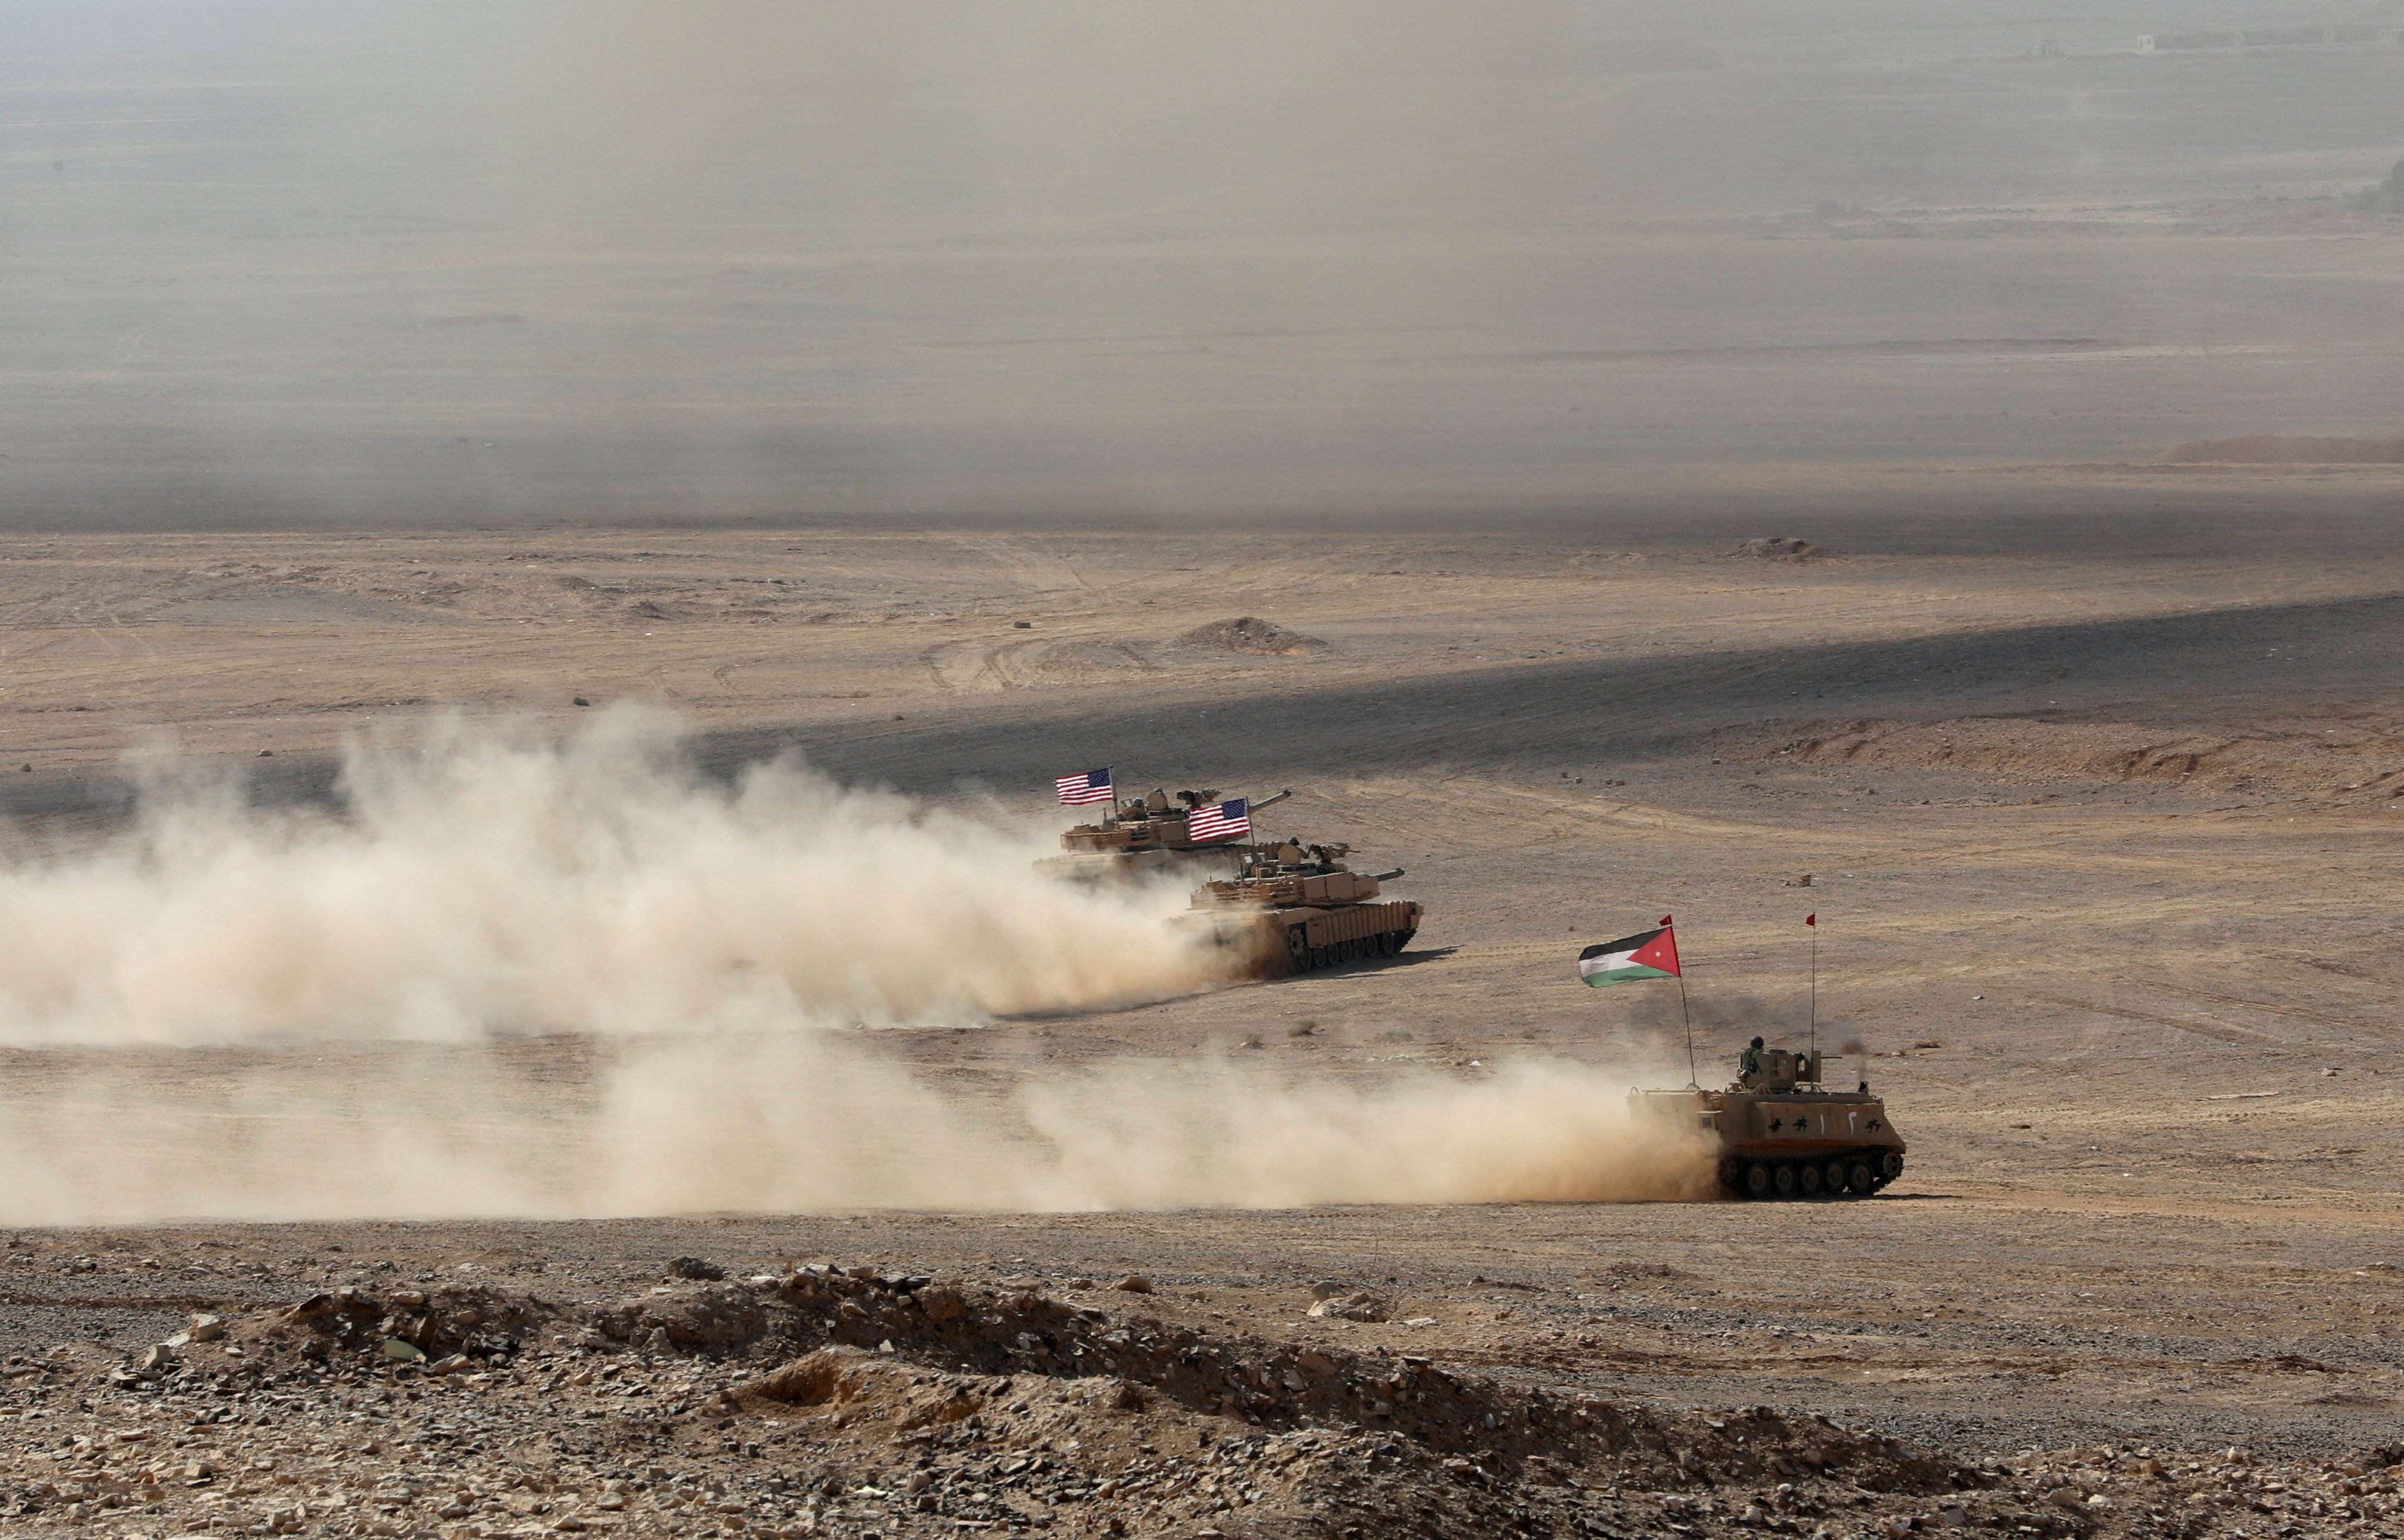 Military vehicles with Jordanian and US flags take part in military exercises, in Zarqa, Jordan on September 14, 2022. Photo: Reuters